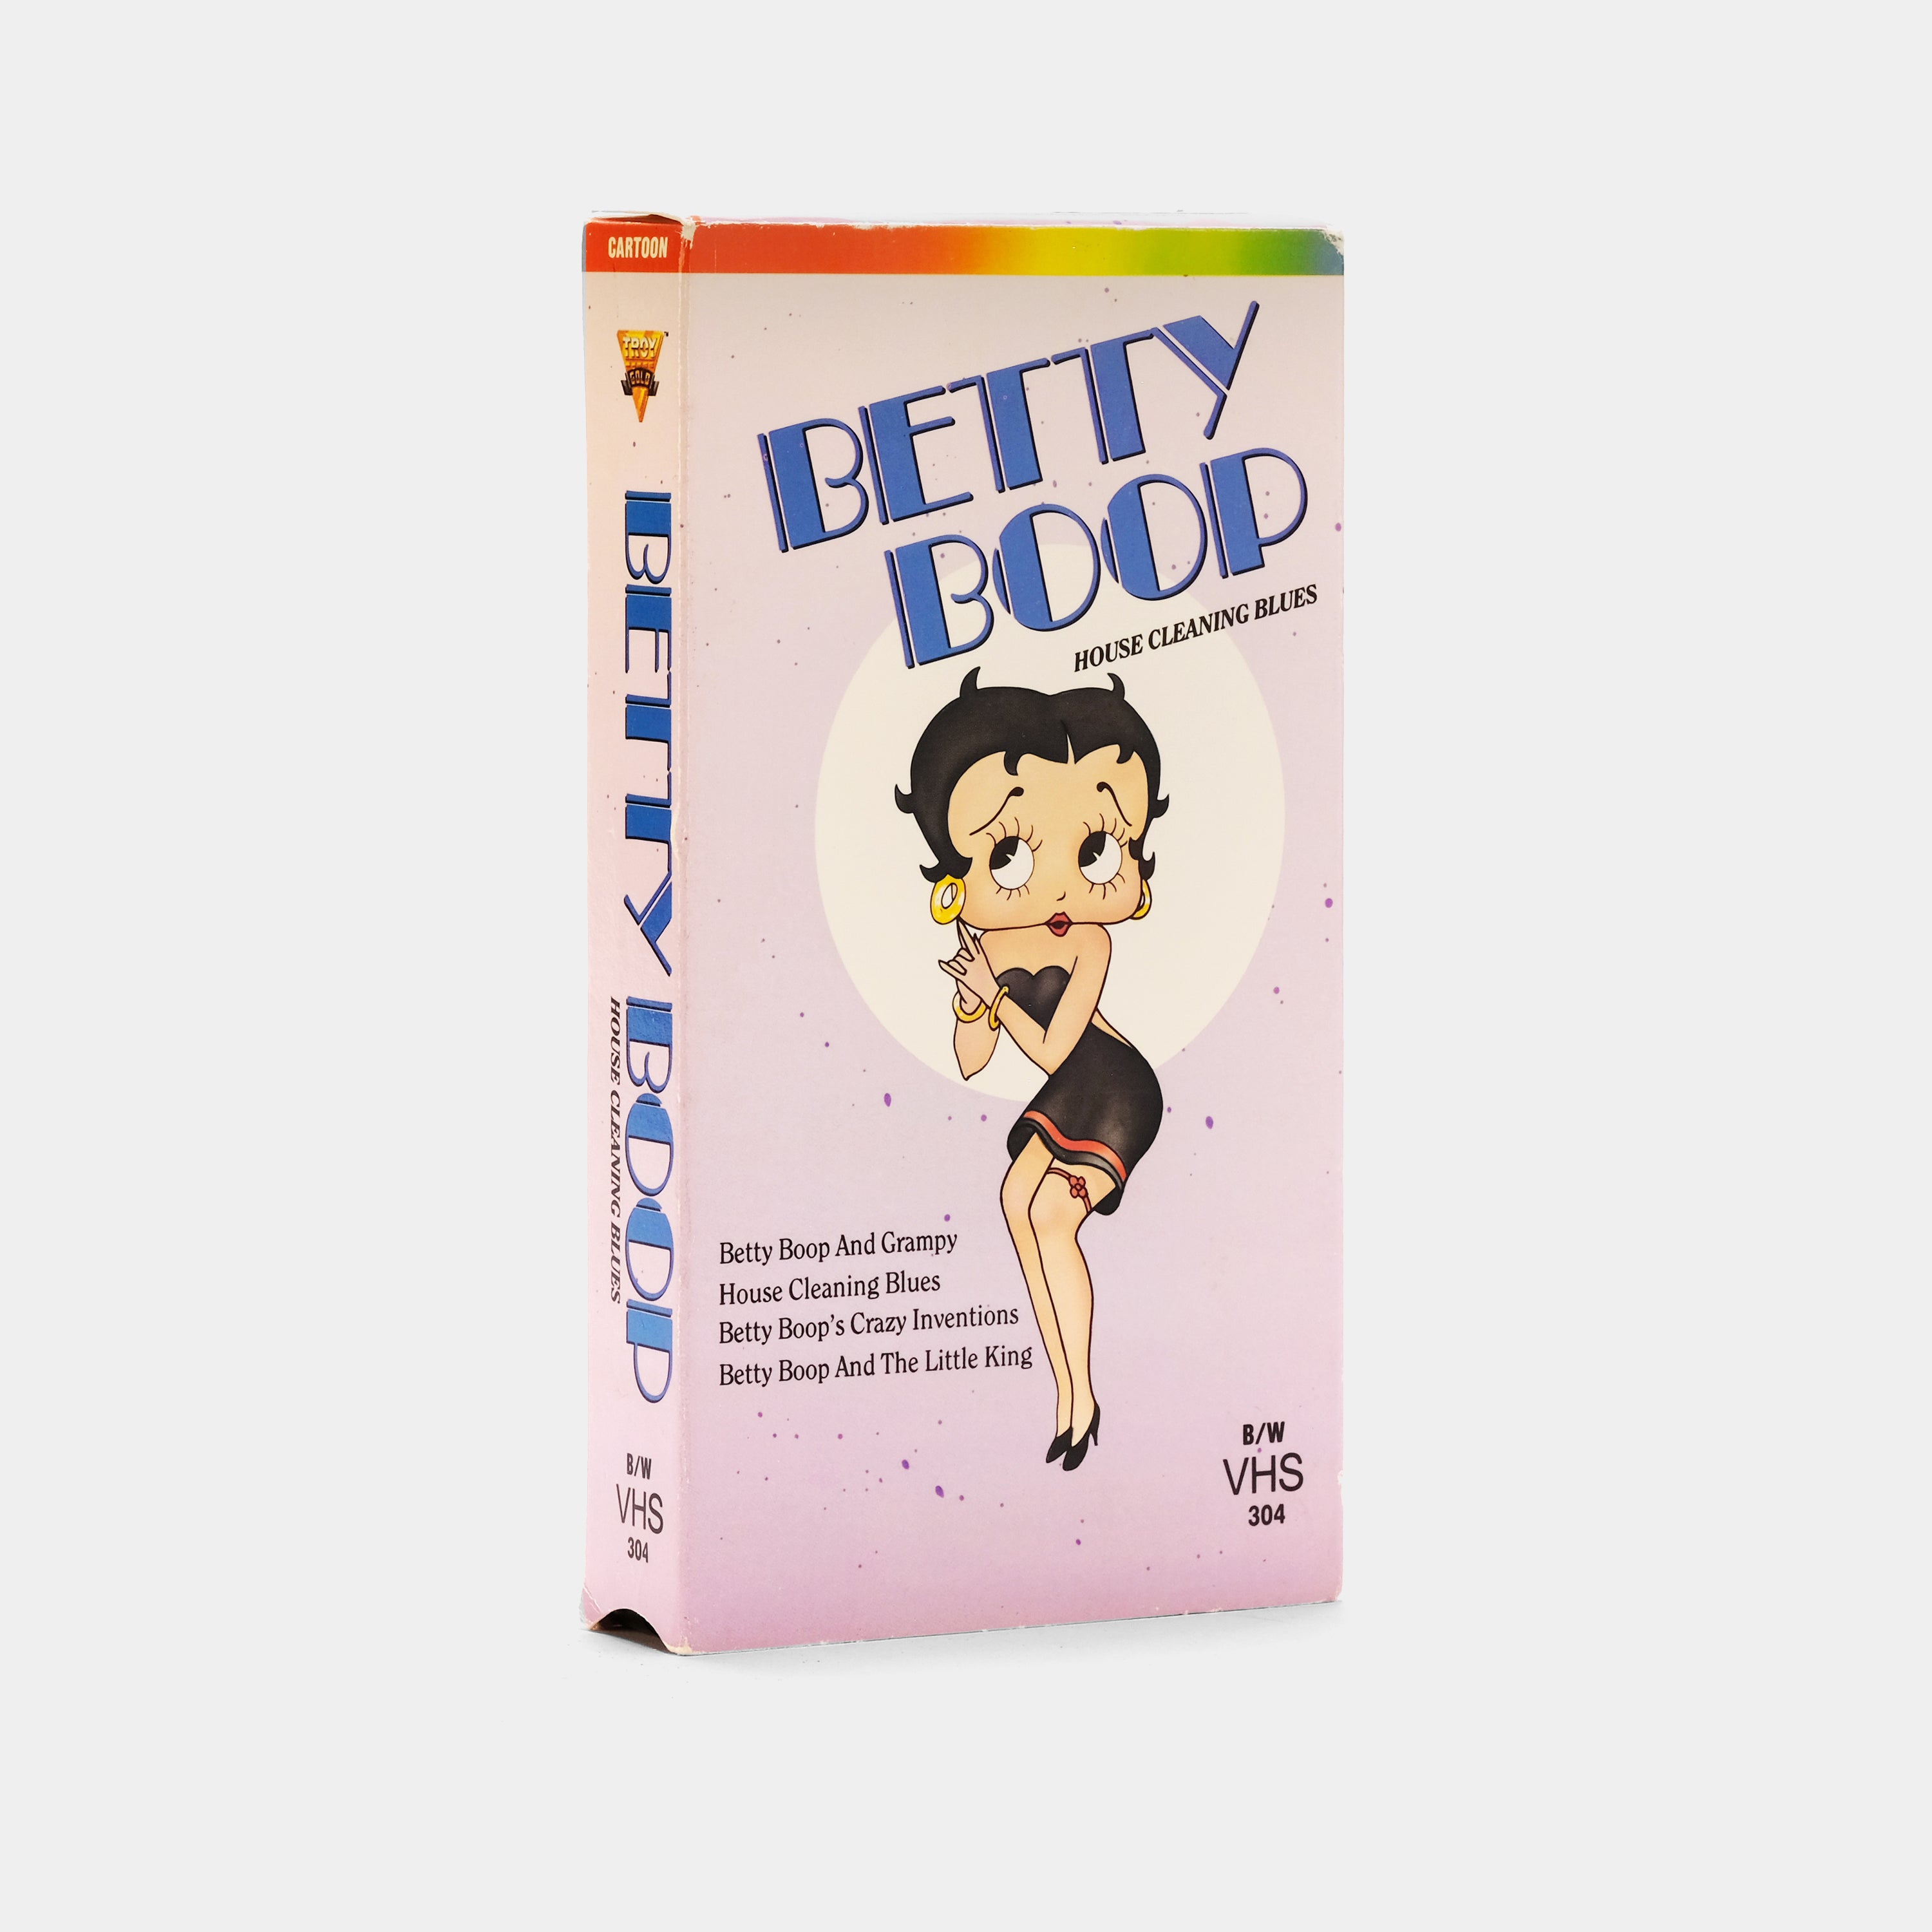 Betty Boop: House Cleaning Blues VHS Tape